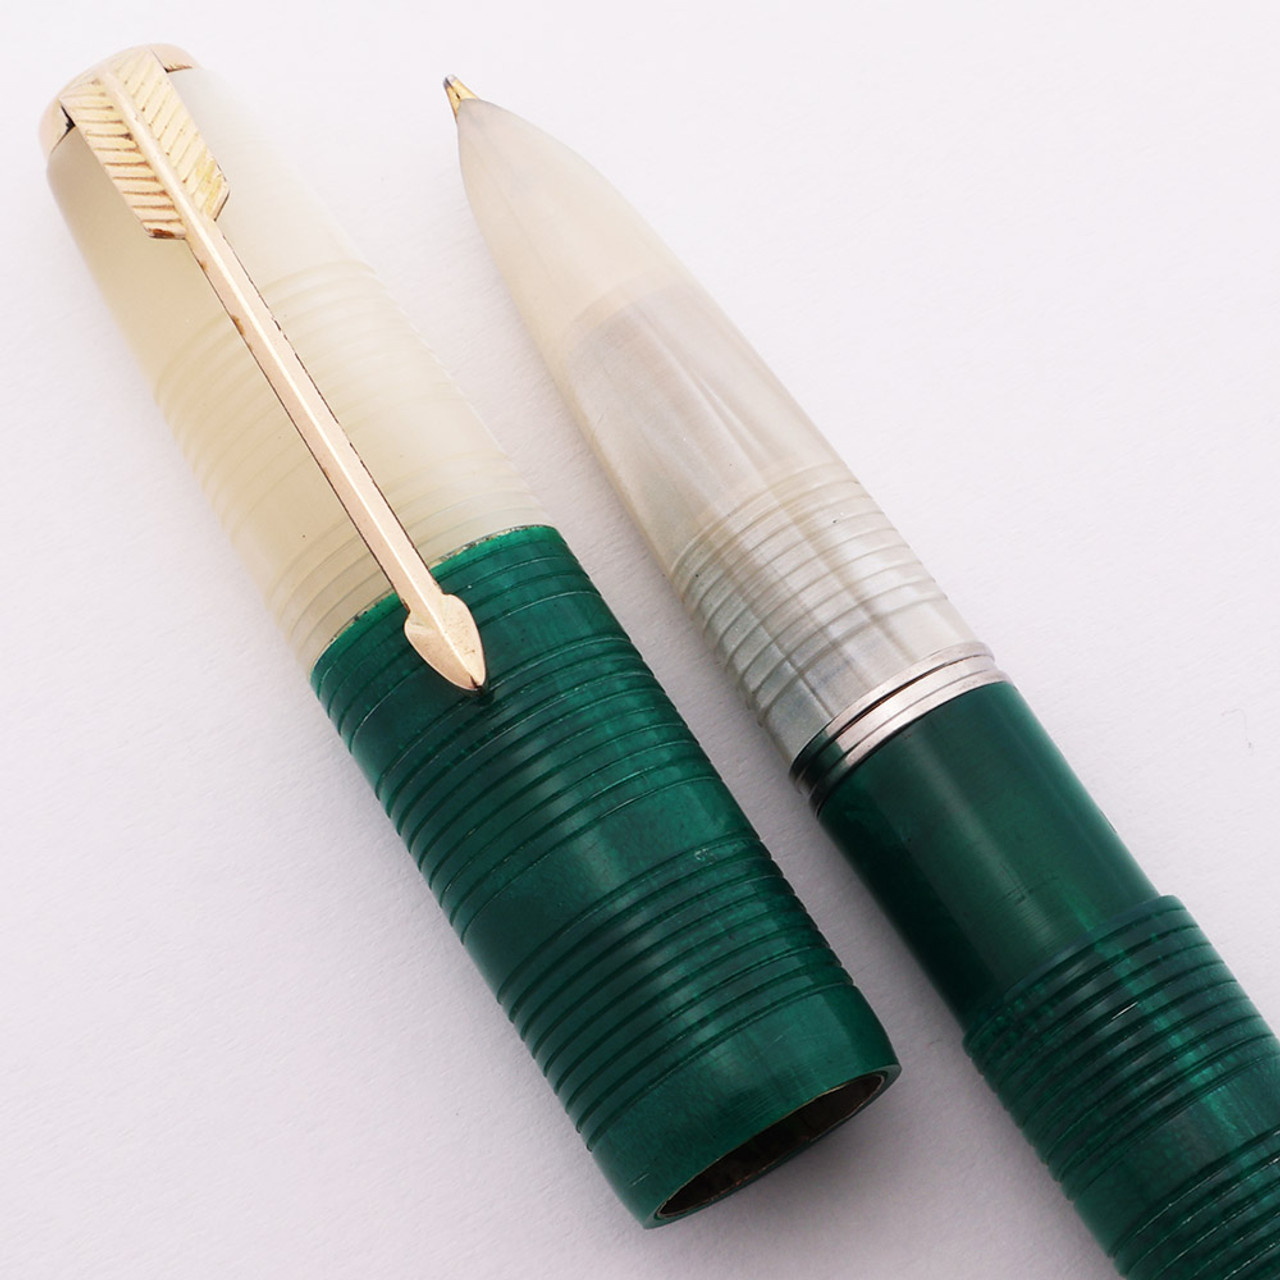 Parker 51 Ariel Kullock "Fantasy" Aerometric - Lined Two Colors, White/Blue-Green, Medium Gold Nib (Excellent, Works Well)